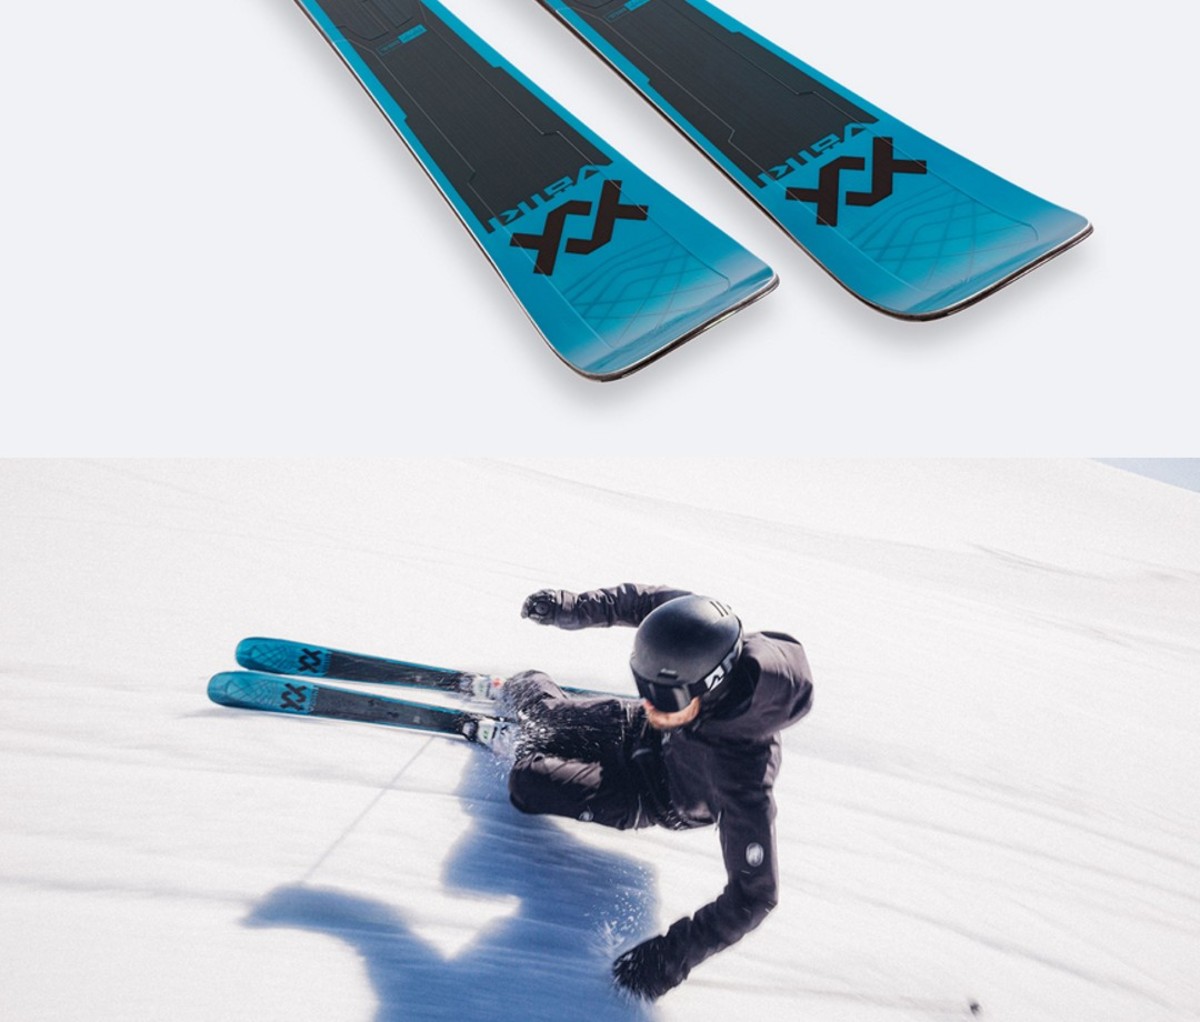 Pair of 3 Volkl Kendo 88 skis above action shot of skier